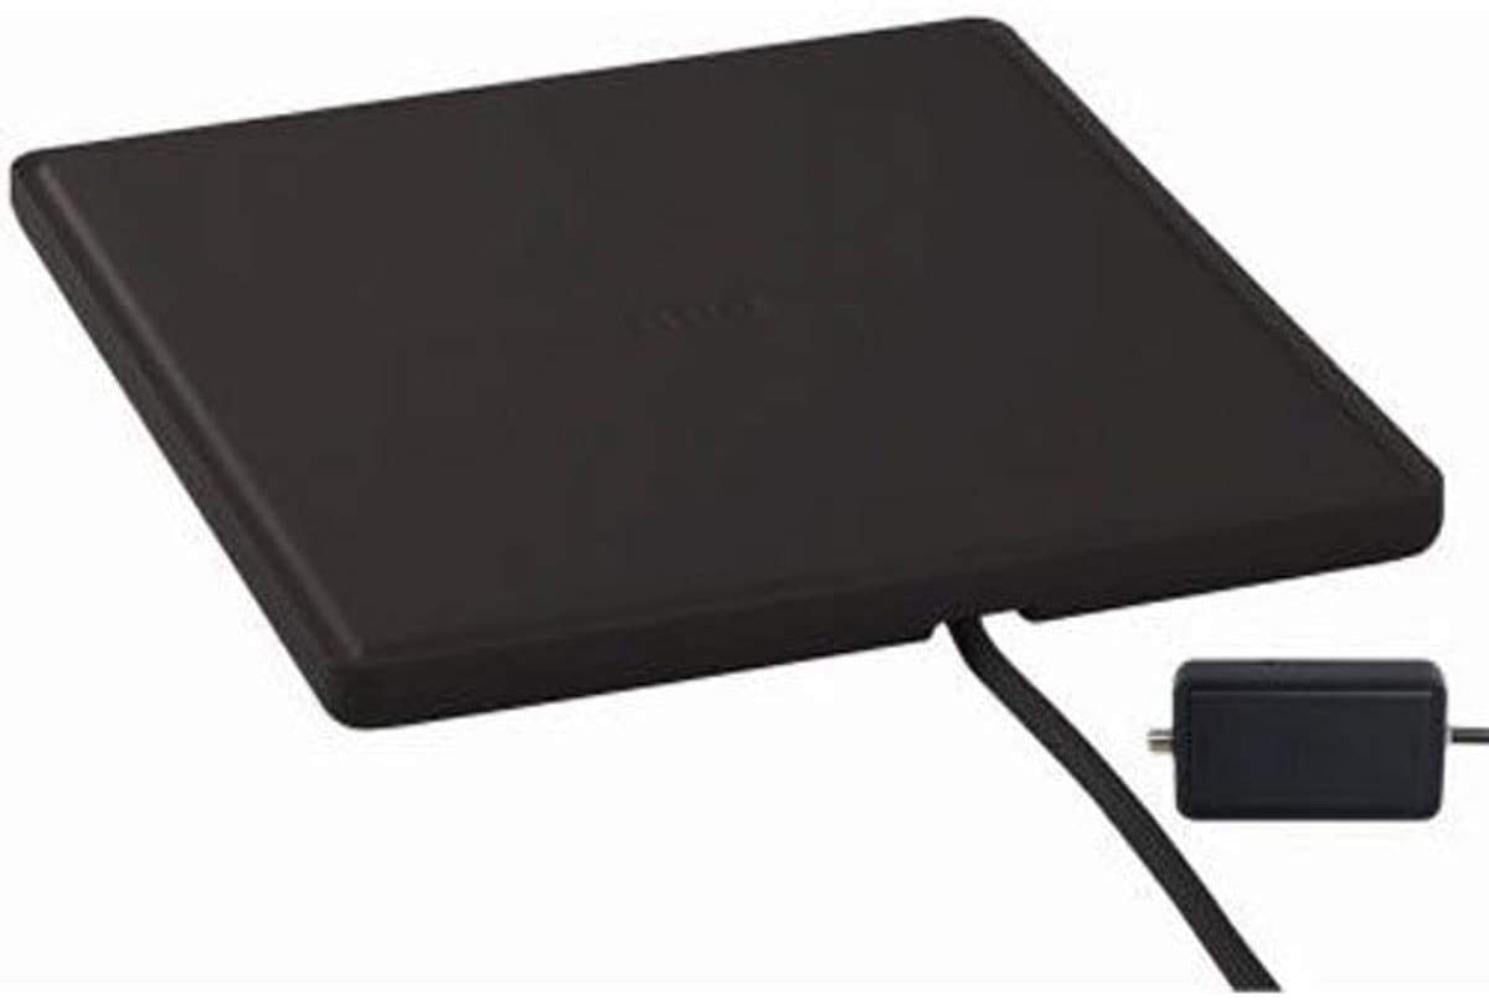 RCA ANT1450BE Indoor TV Antenna - 55 Mile Range, Omni-Directional Flat Digital TV Antenna, Amplified, Enjoy top-rated HDTV network programming and your.., By Visit the RCA Store